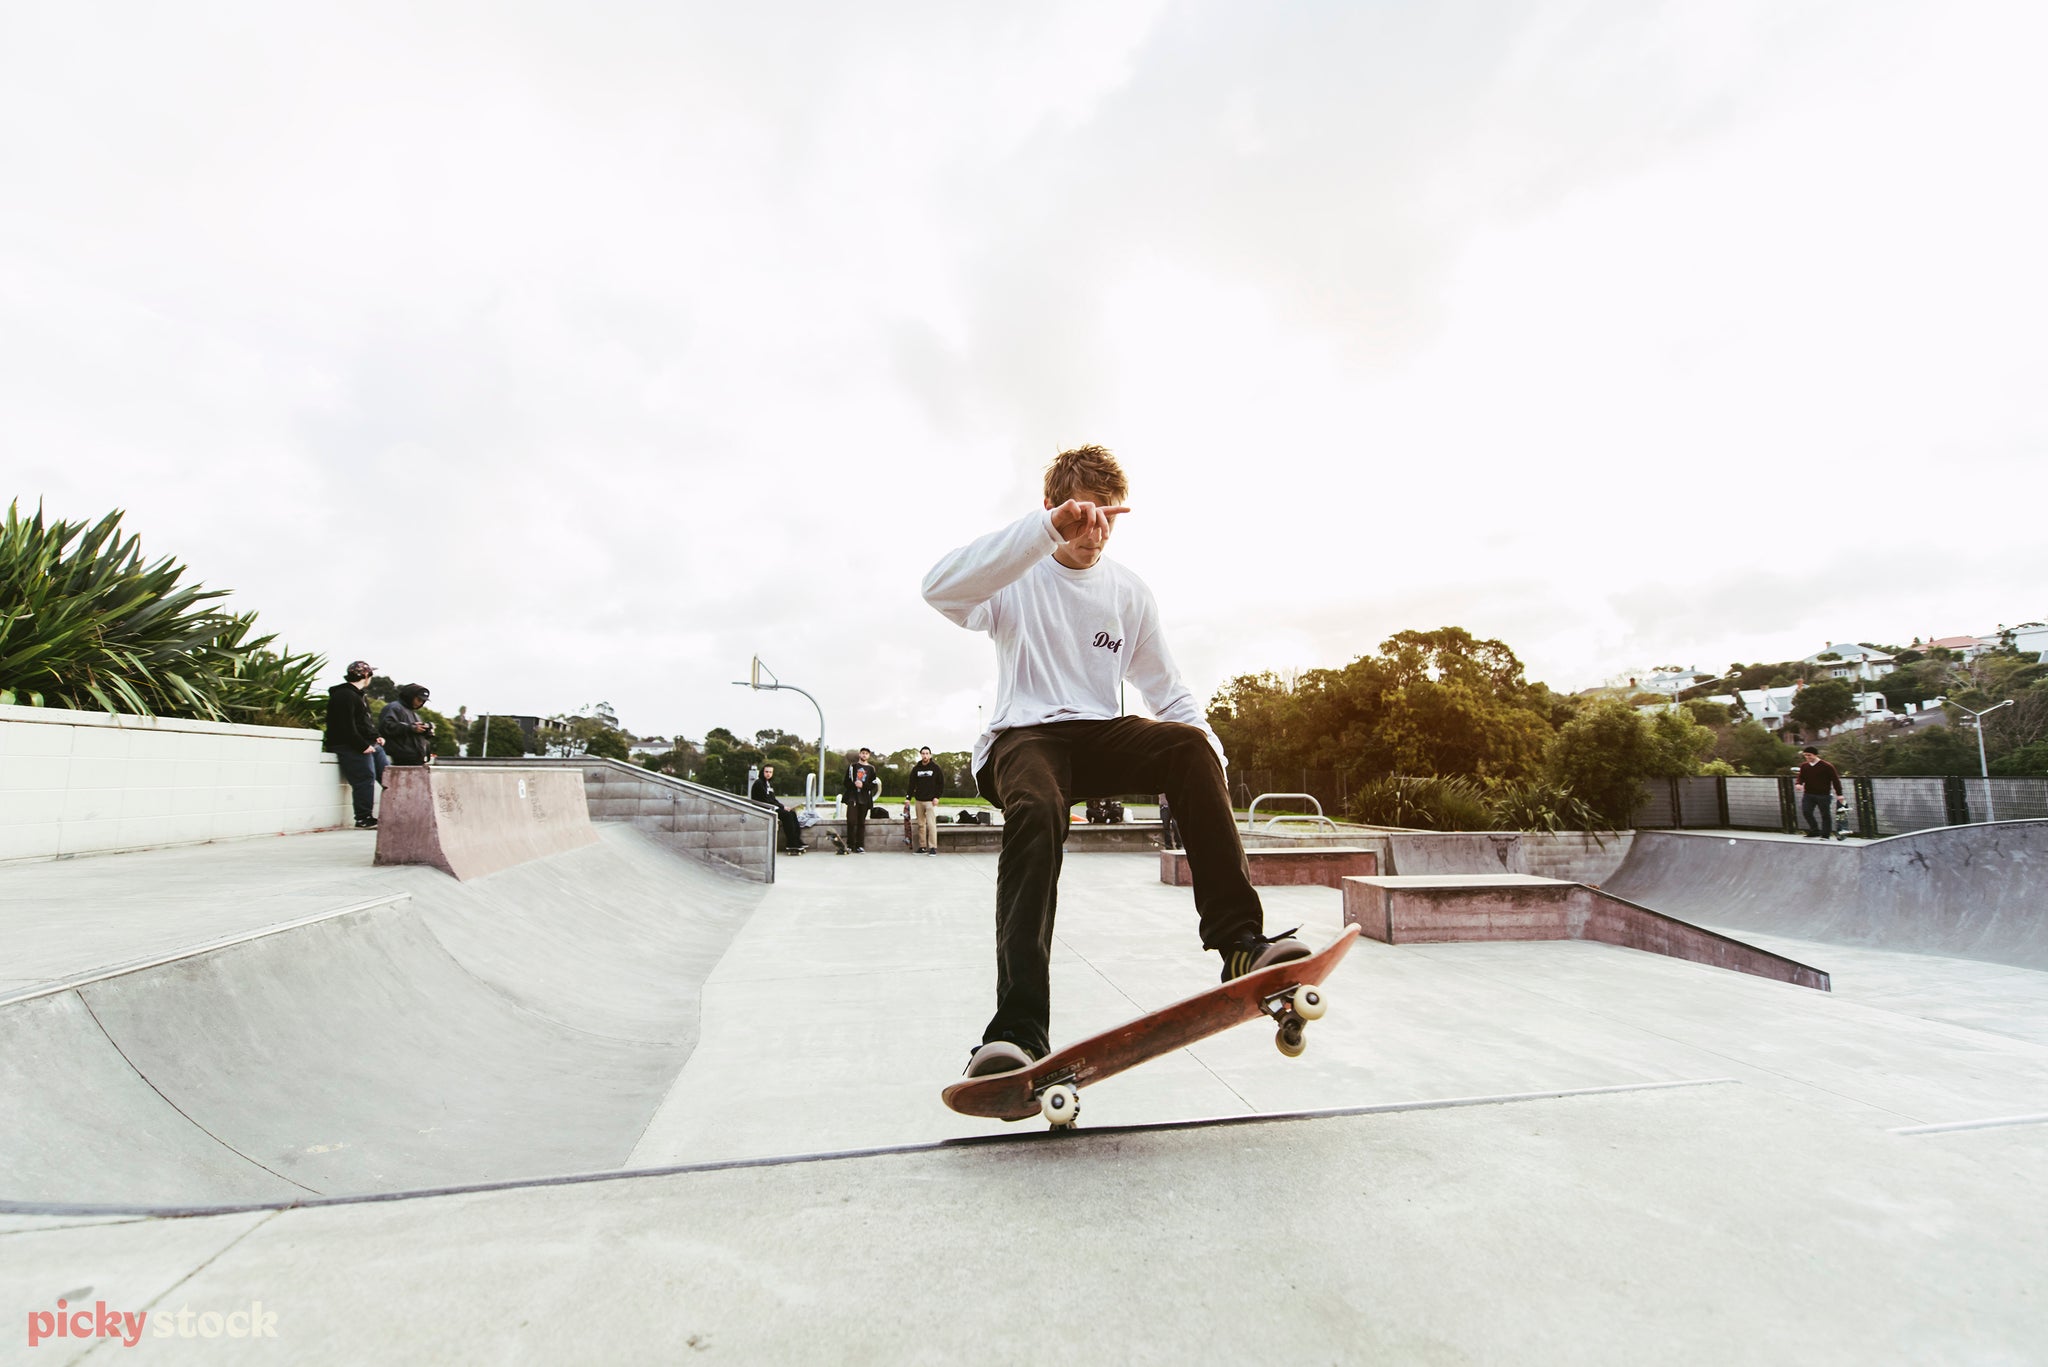 Skate boarder in dark pants and white shirt grinds a concrete rail in a New Zealand skate park.